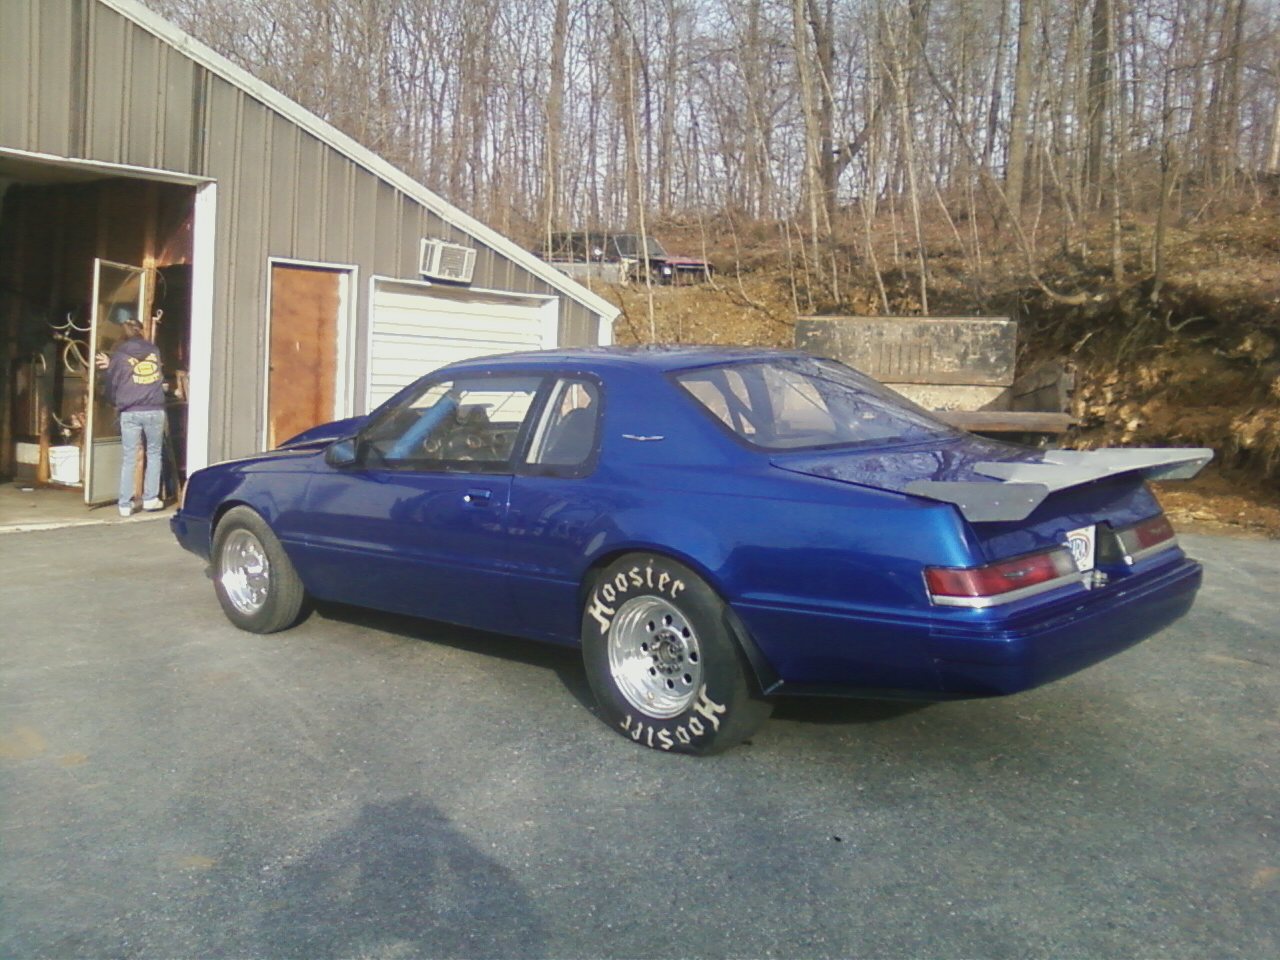 blue 1985 Ford Thunderbird turbo coupe